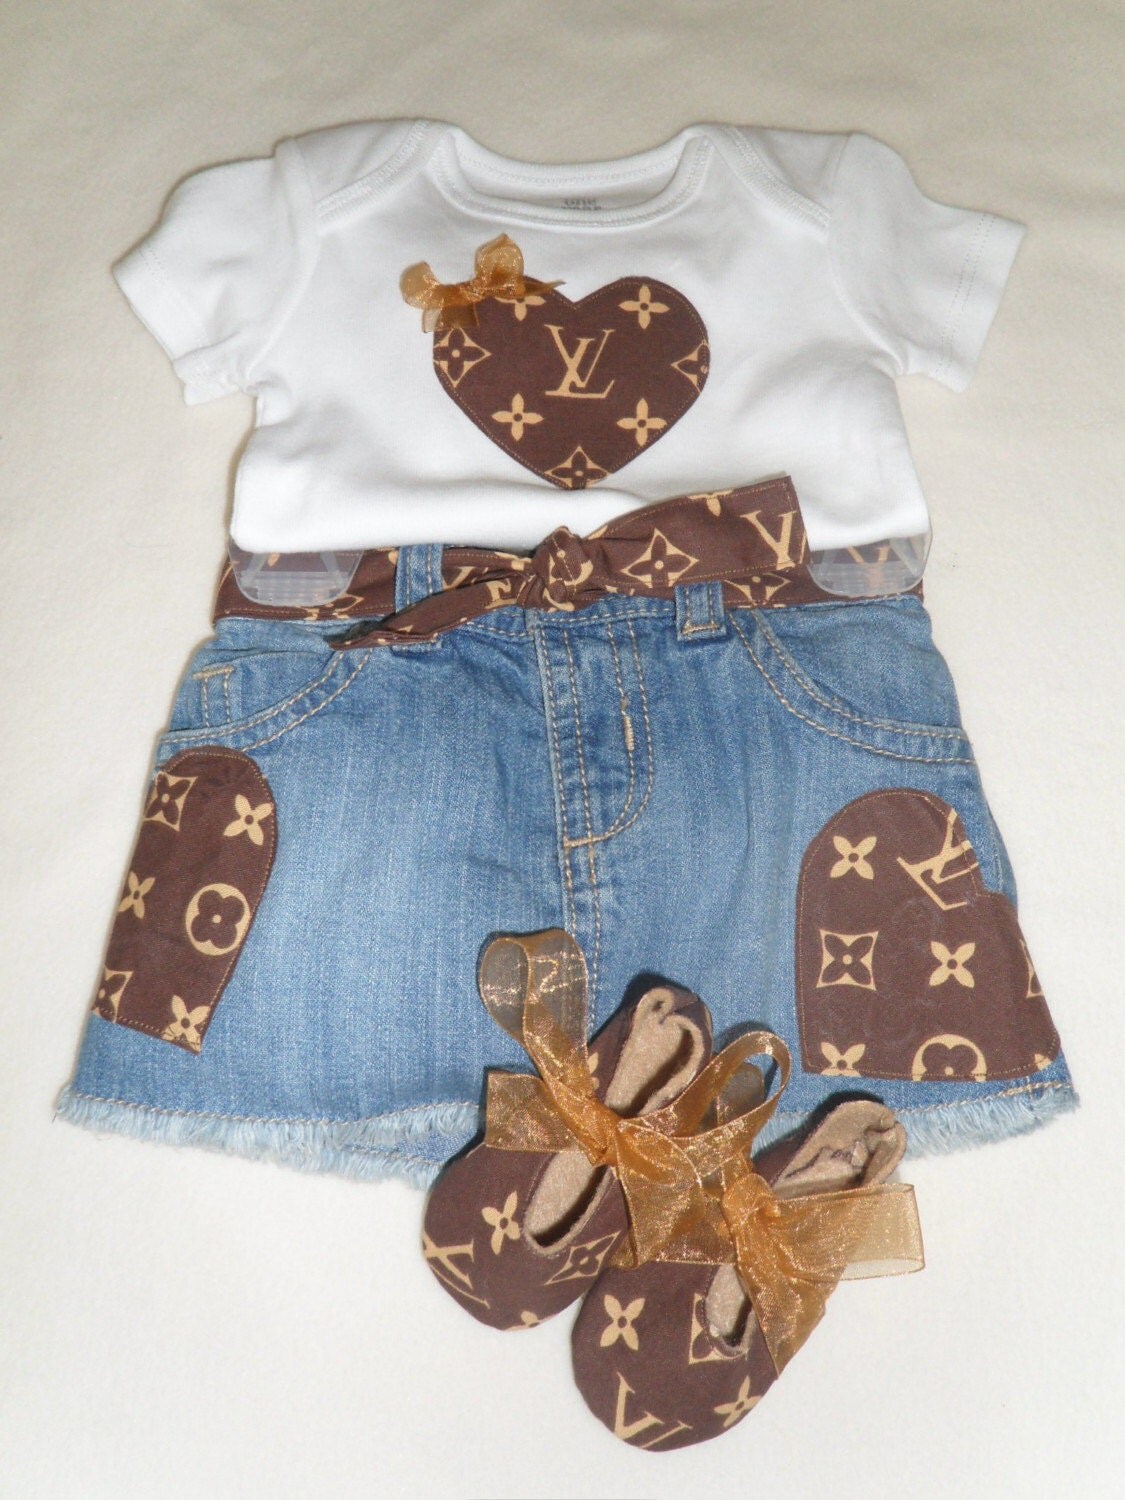 Baby Girl Louis Vuitton Inspired Outfit